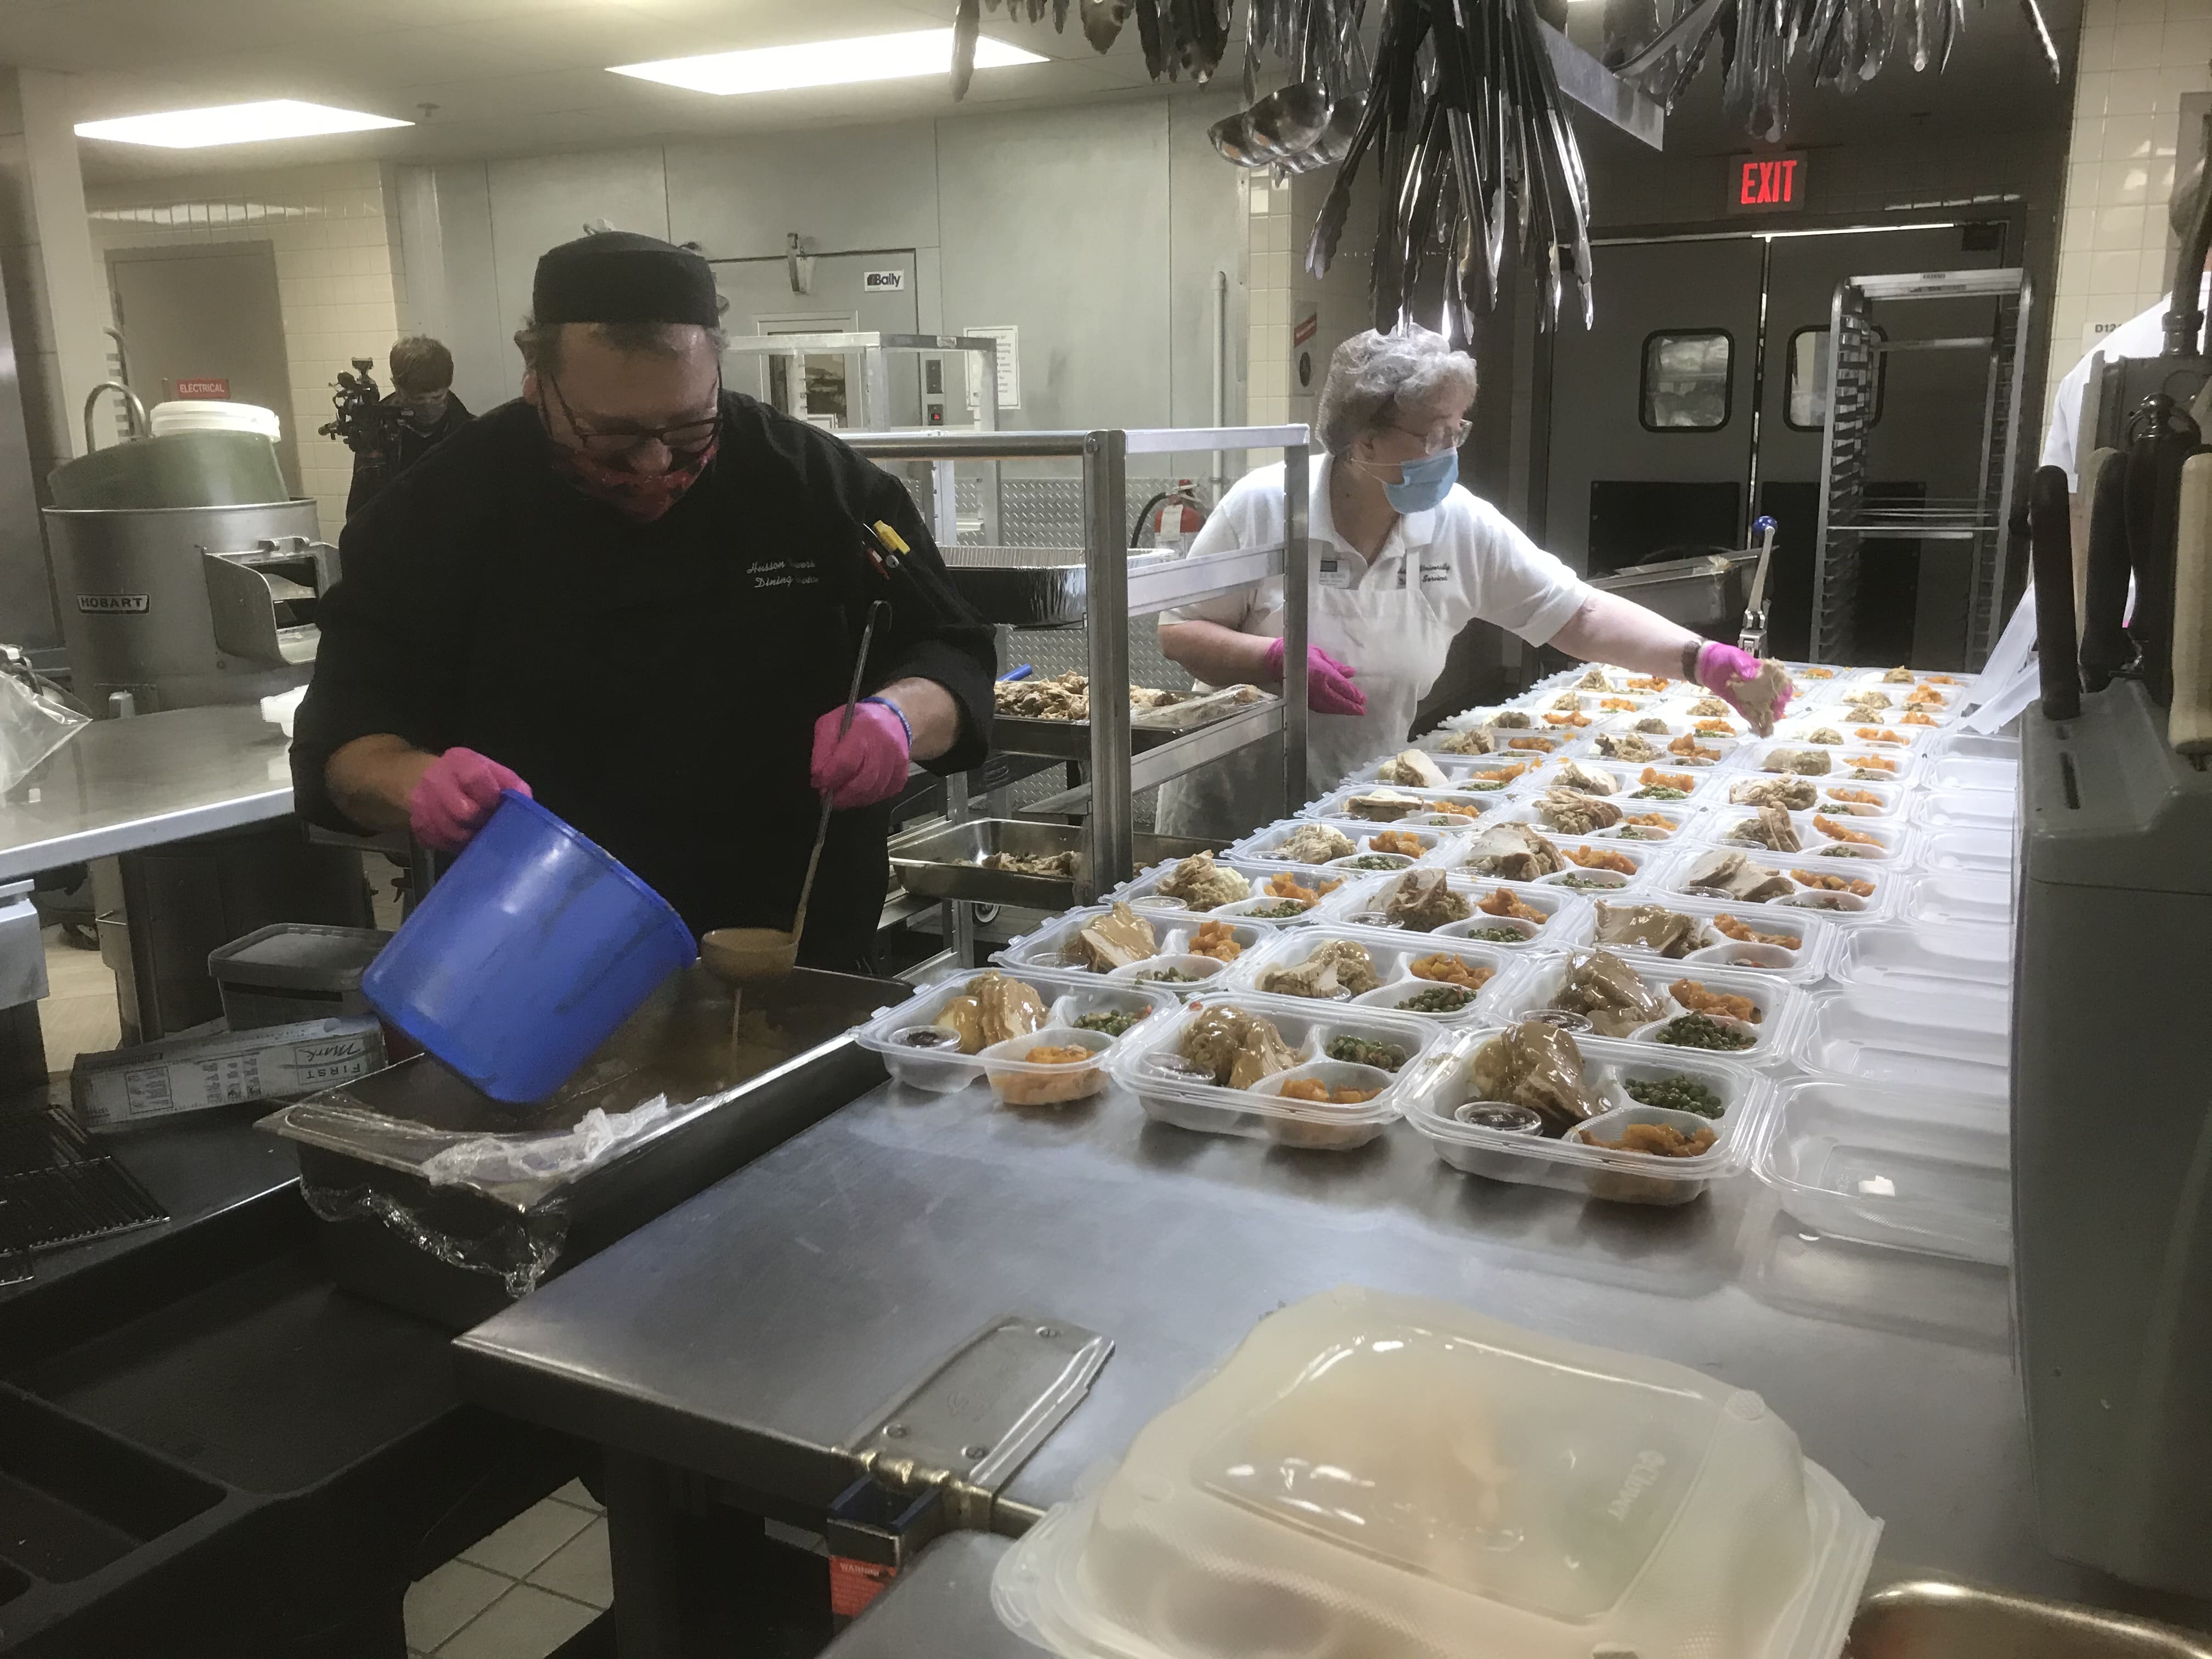 People prep food in a commercial kitchen